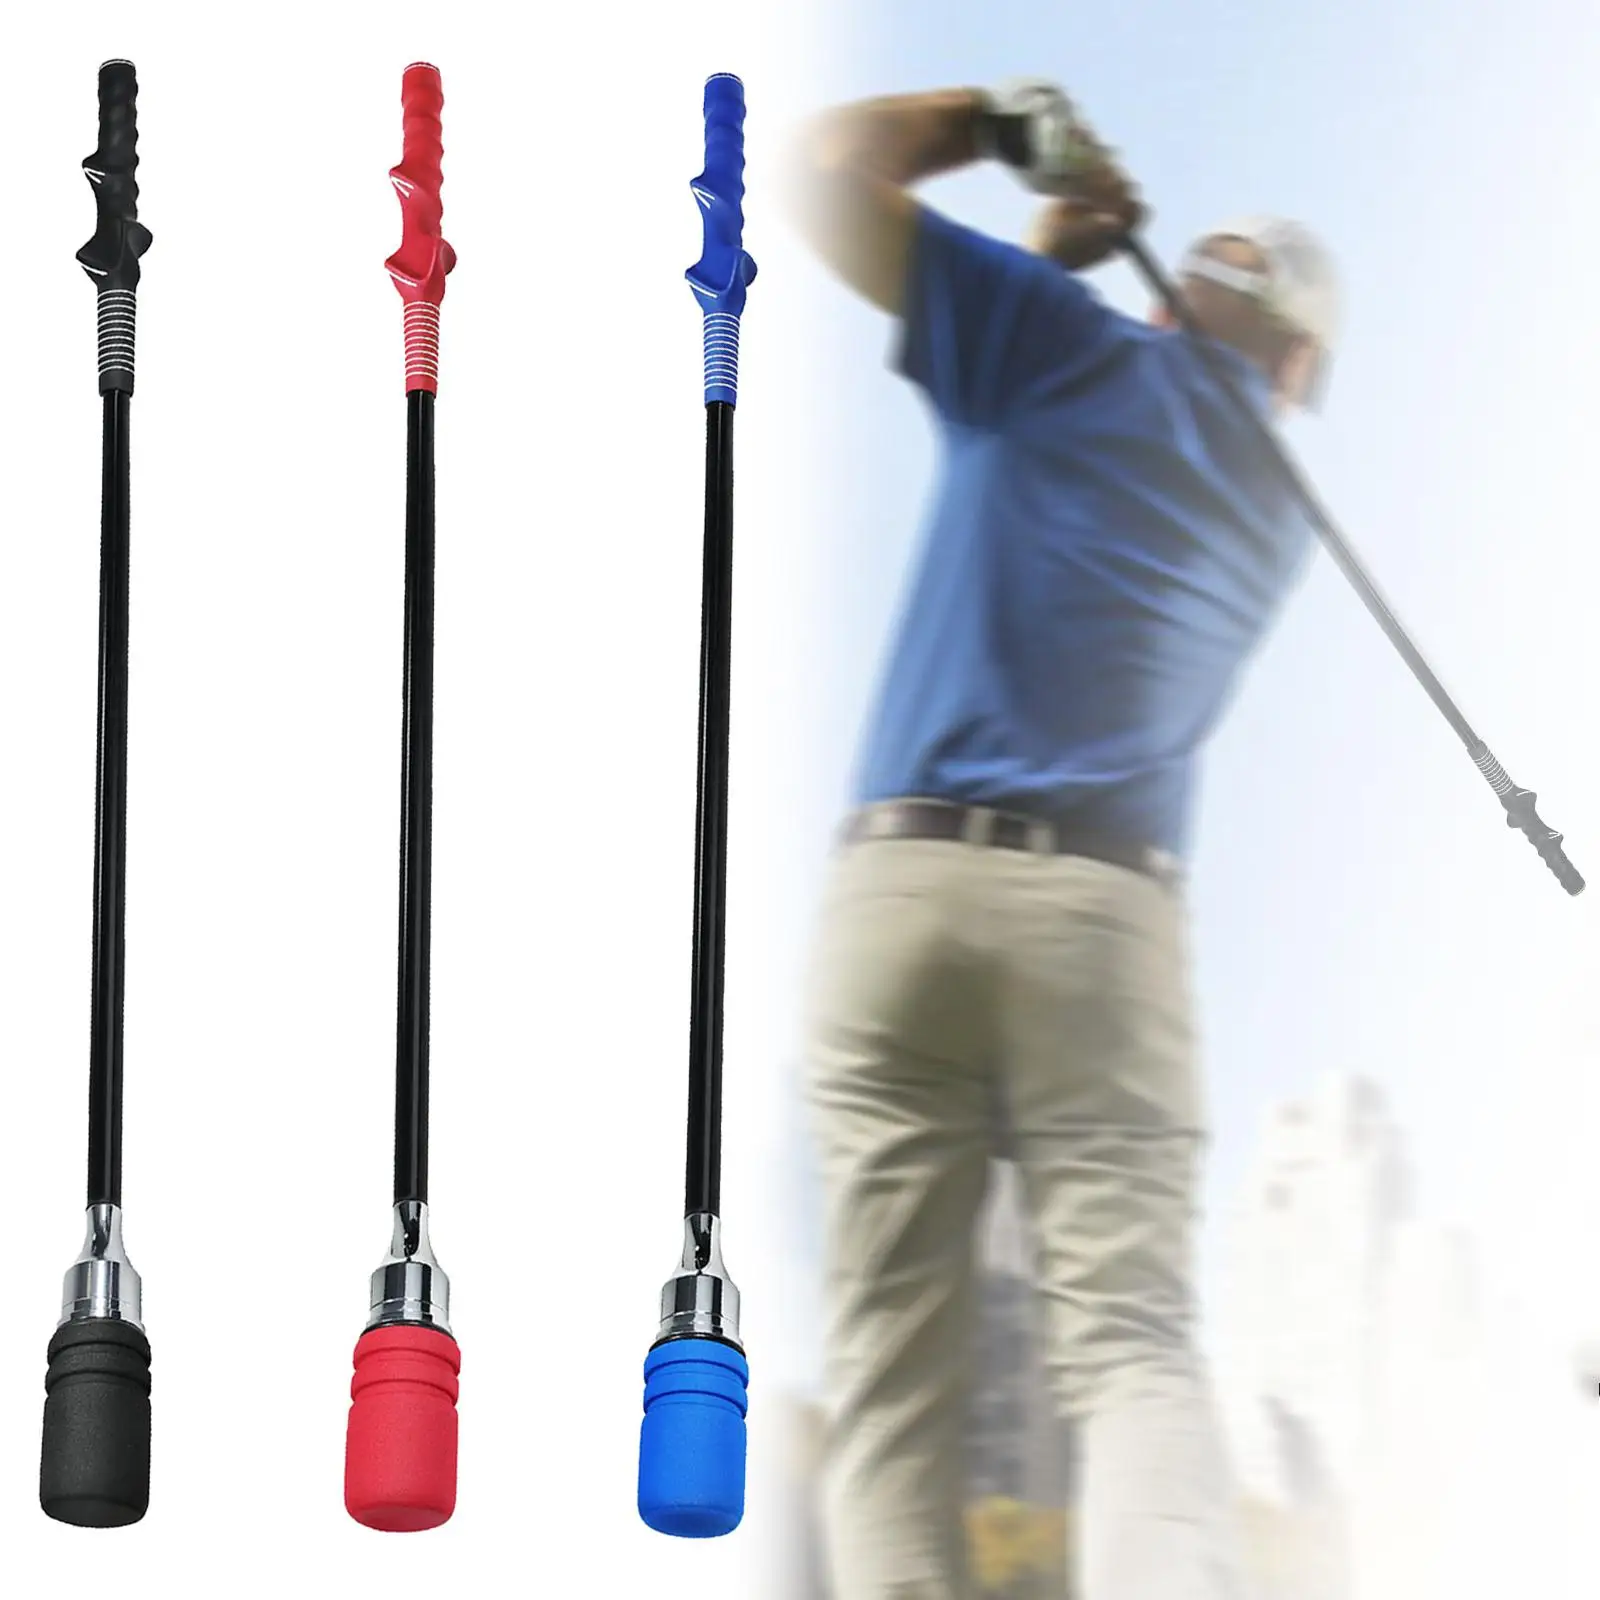 Golf Swing Trainer, Golf Practice Rod for Women Men, Golf Training Aid, Golf Warm up Rod for Position Correction